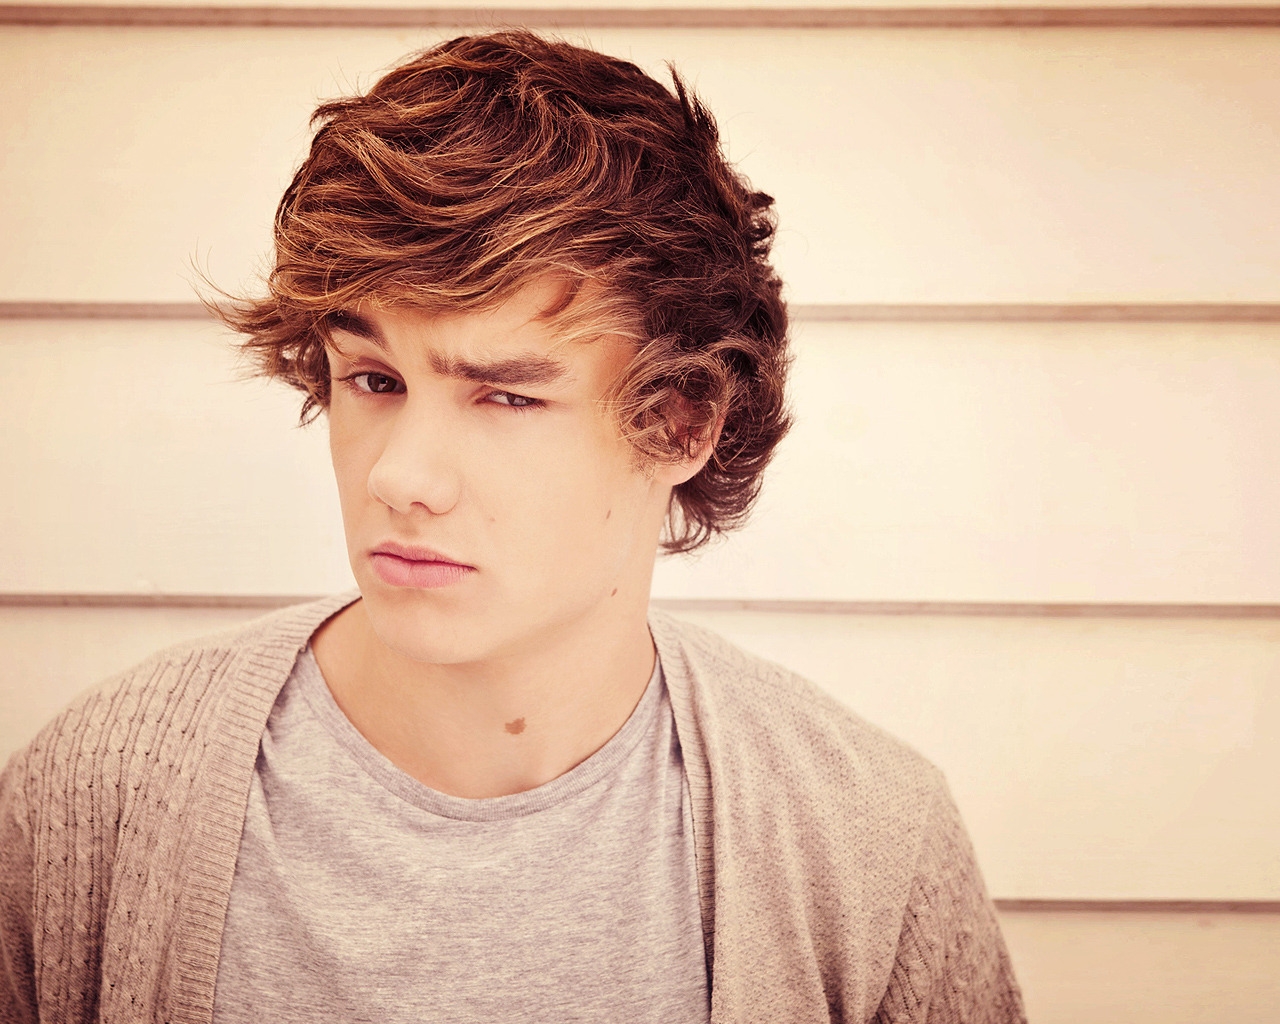 Liam Payne Look for 1280 x 1024 resolution